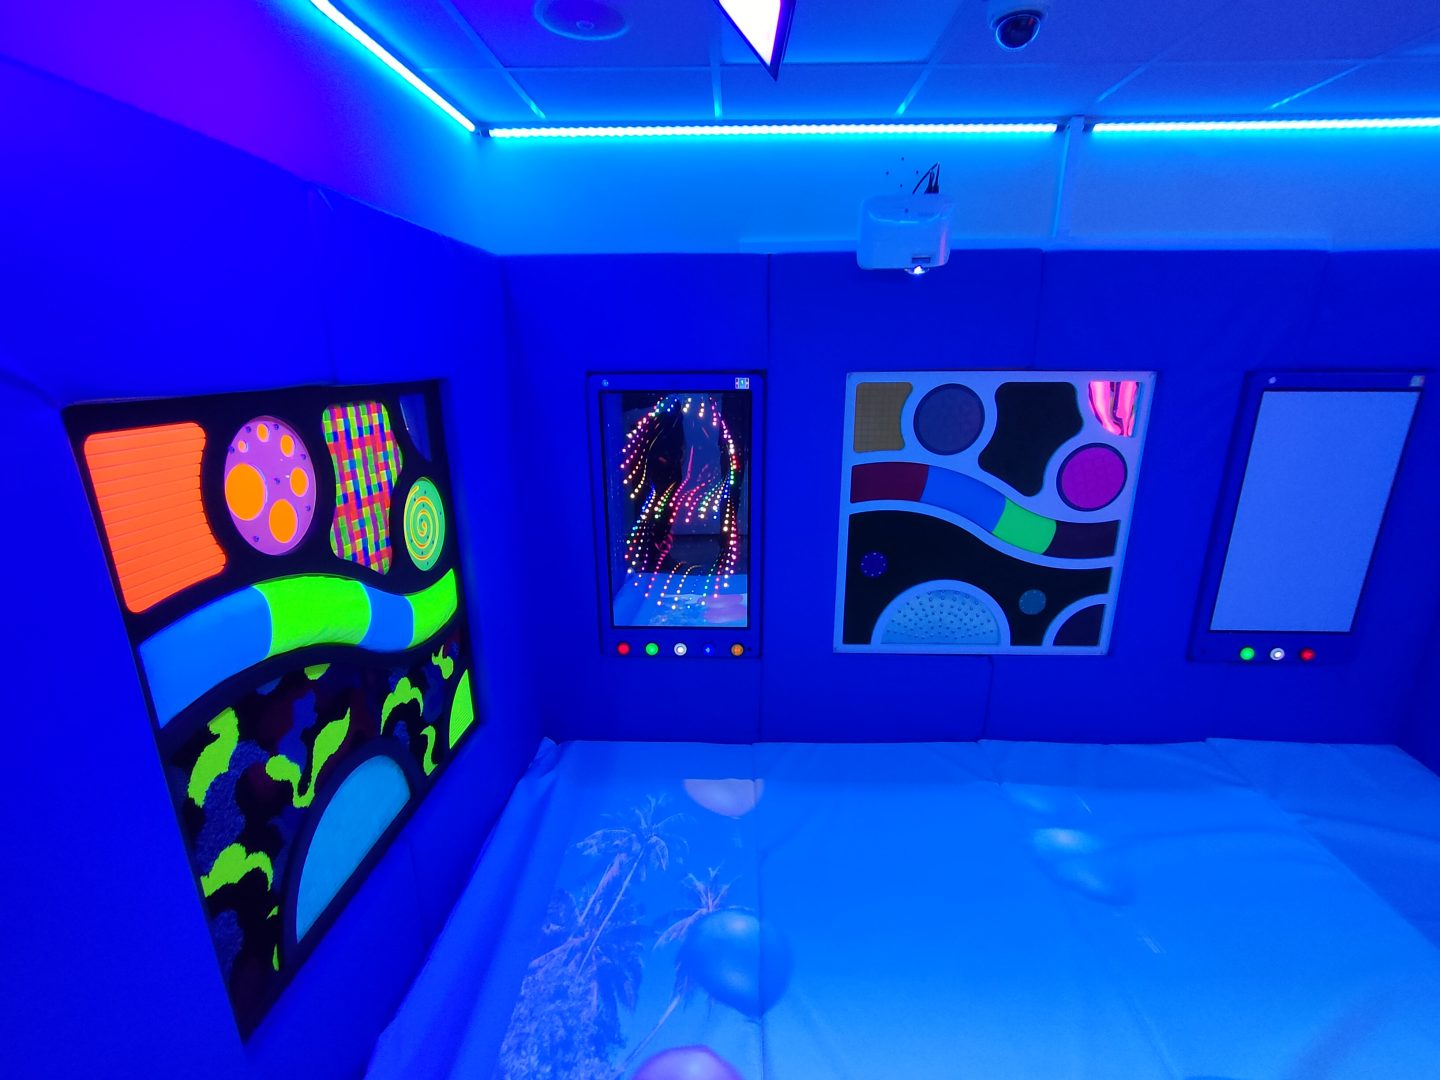 The image shows a sensory room illuminated with blue lighting, featuring interactive and colourful panels on the walls. The panels display various patterns and shapes, including spirals, abstract designs, and geometric figures that are vividly highlighted by the black light. There are also buttons with different colours at the bottom of each panel, likely used to interact with the panels. The floor is covered with a soft padded floor, creating a safe and engaging environment. The floor of the sensory room features an interactive projector.